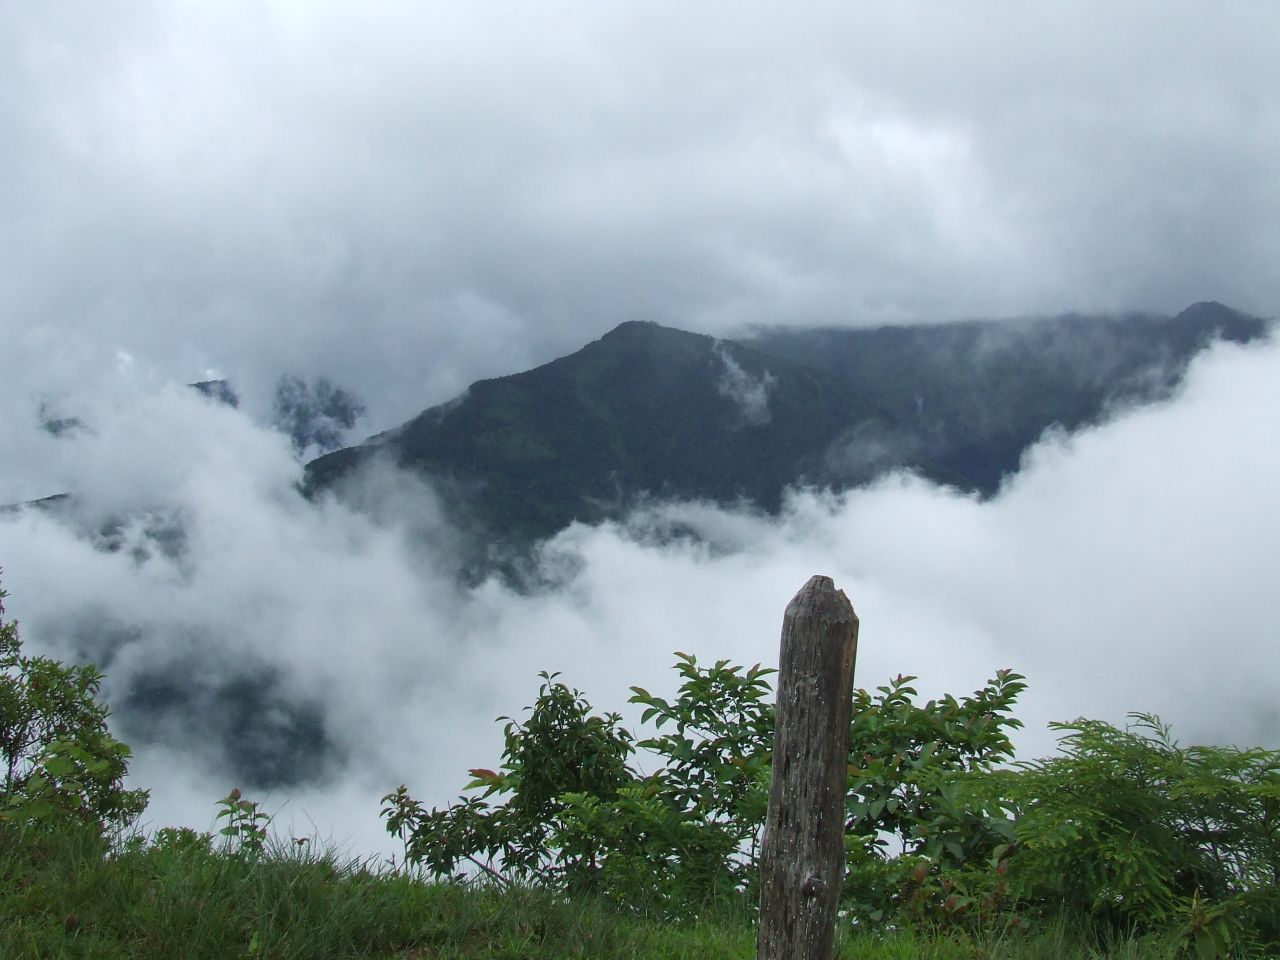 mountains covered in thick clouds and a fence post